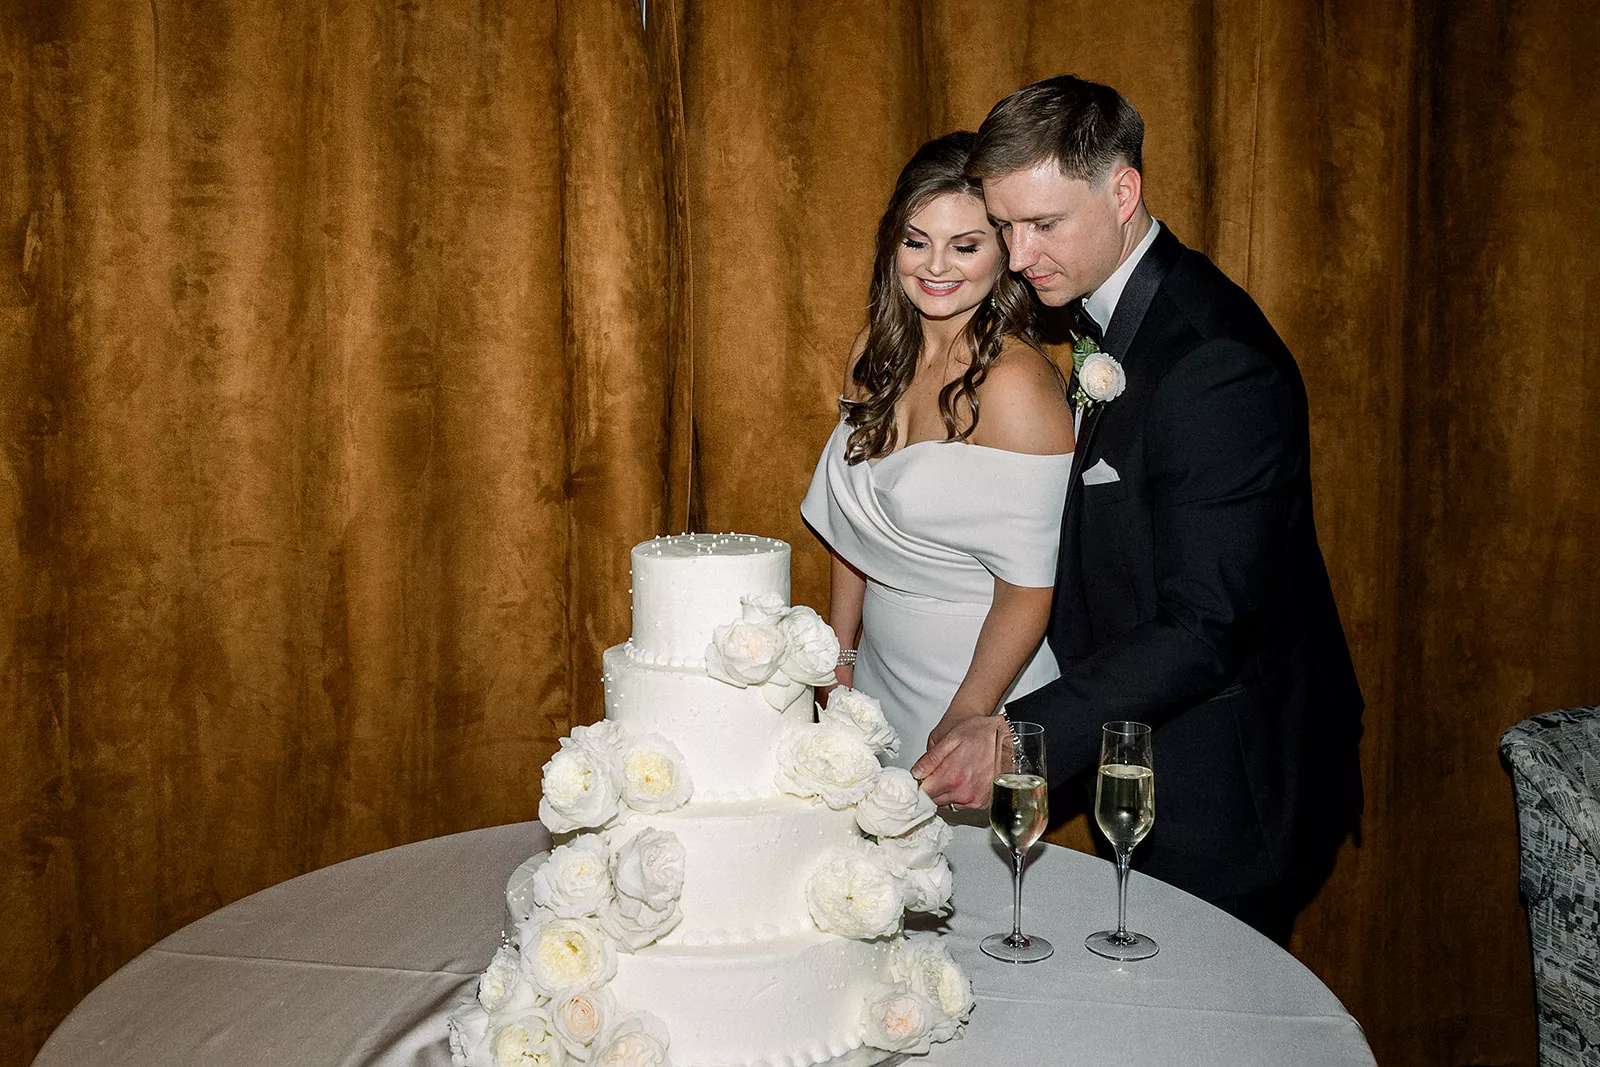 Newlyweds cut their four tier white cake with white roses on it